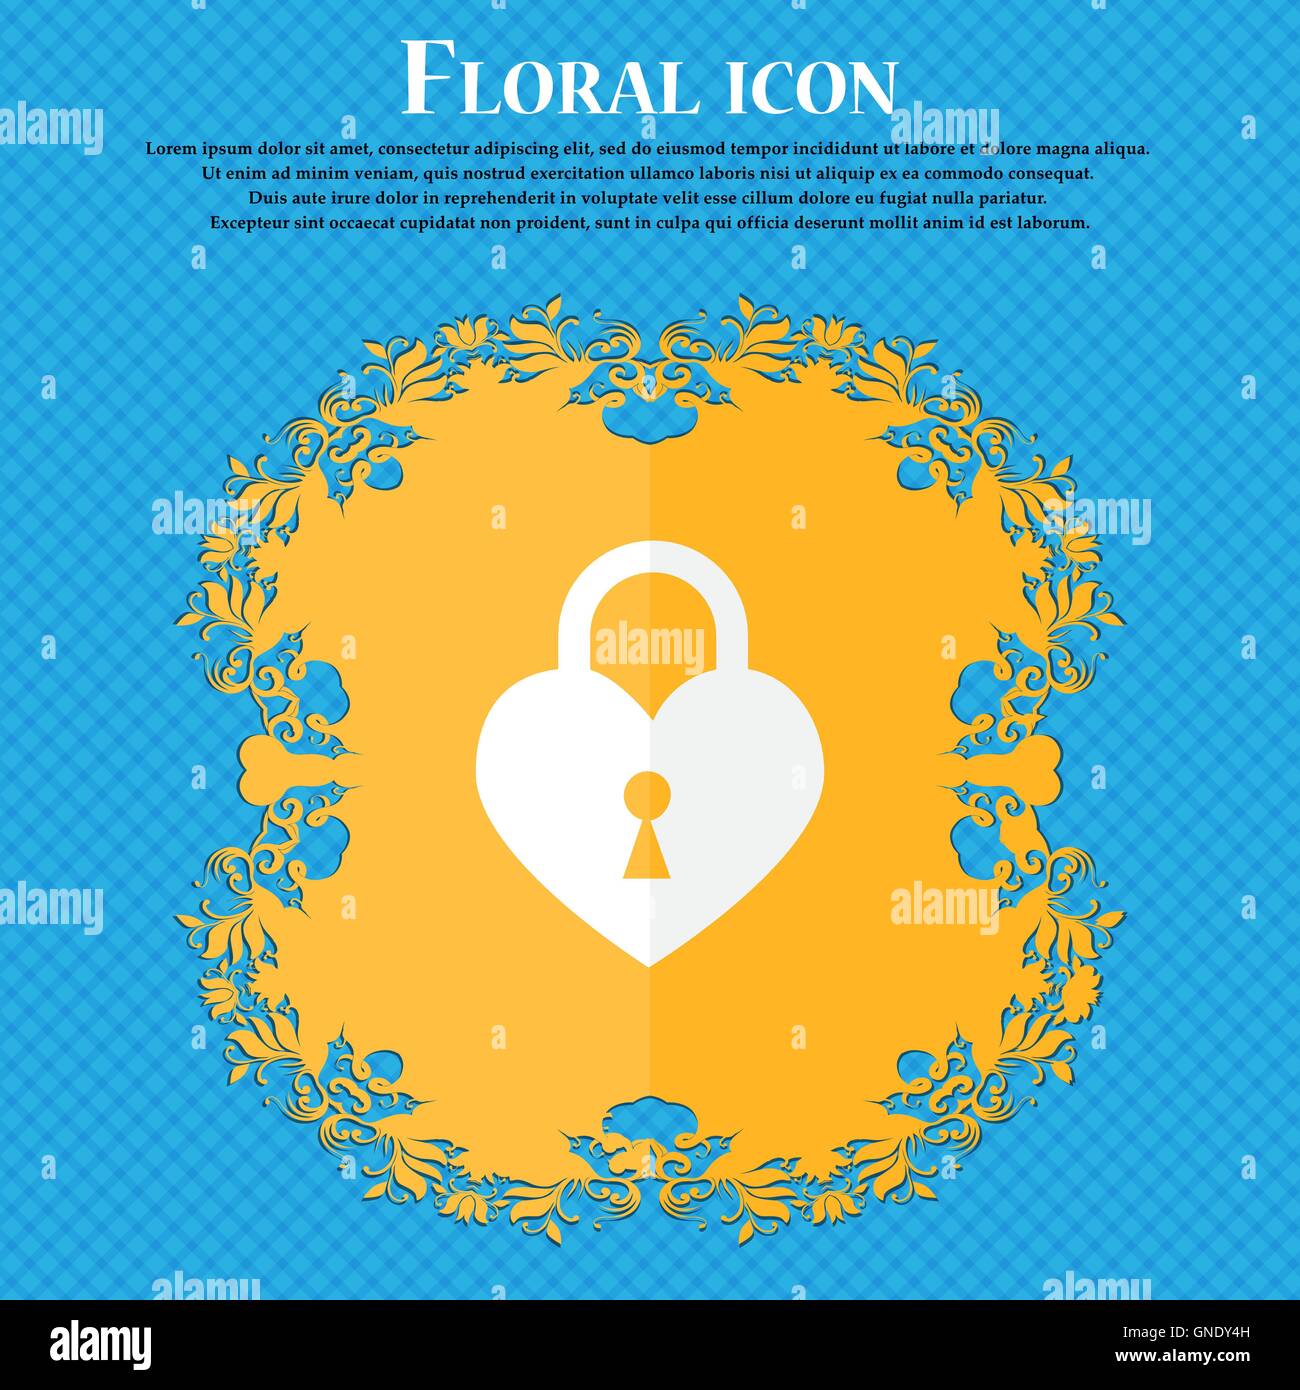 Lock in the shape of heart icon. Floral flat design on a blue abstract background with place for your text. Vector Stock Vector